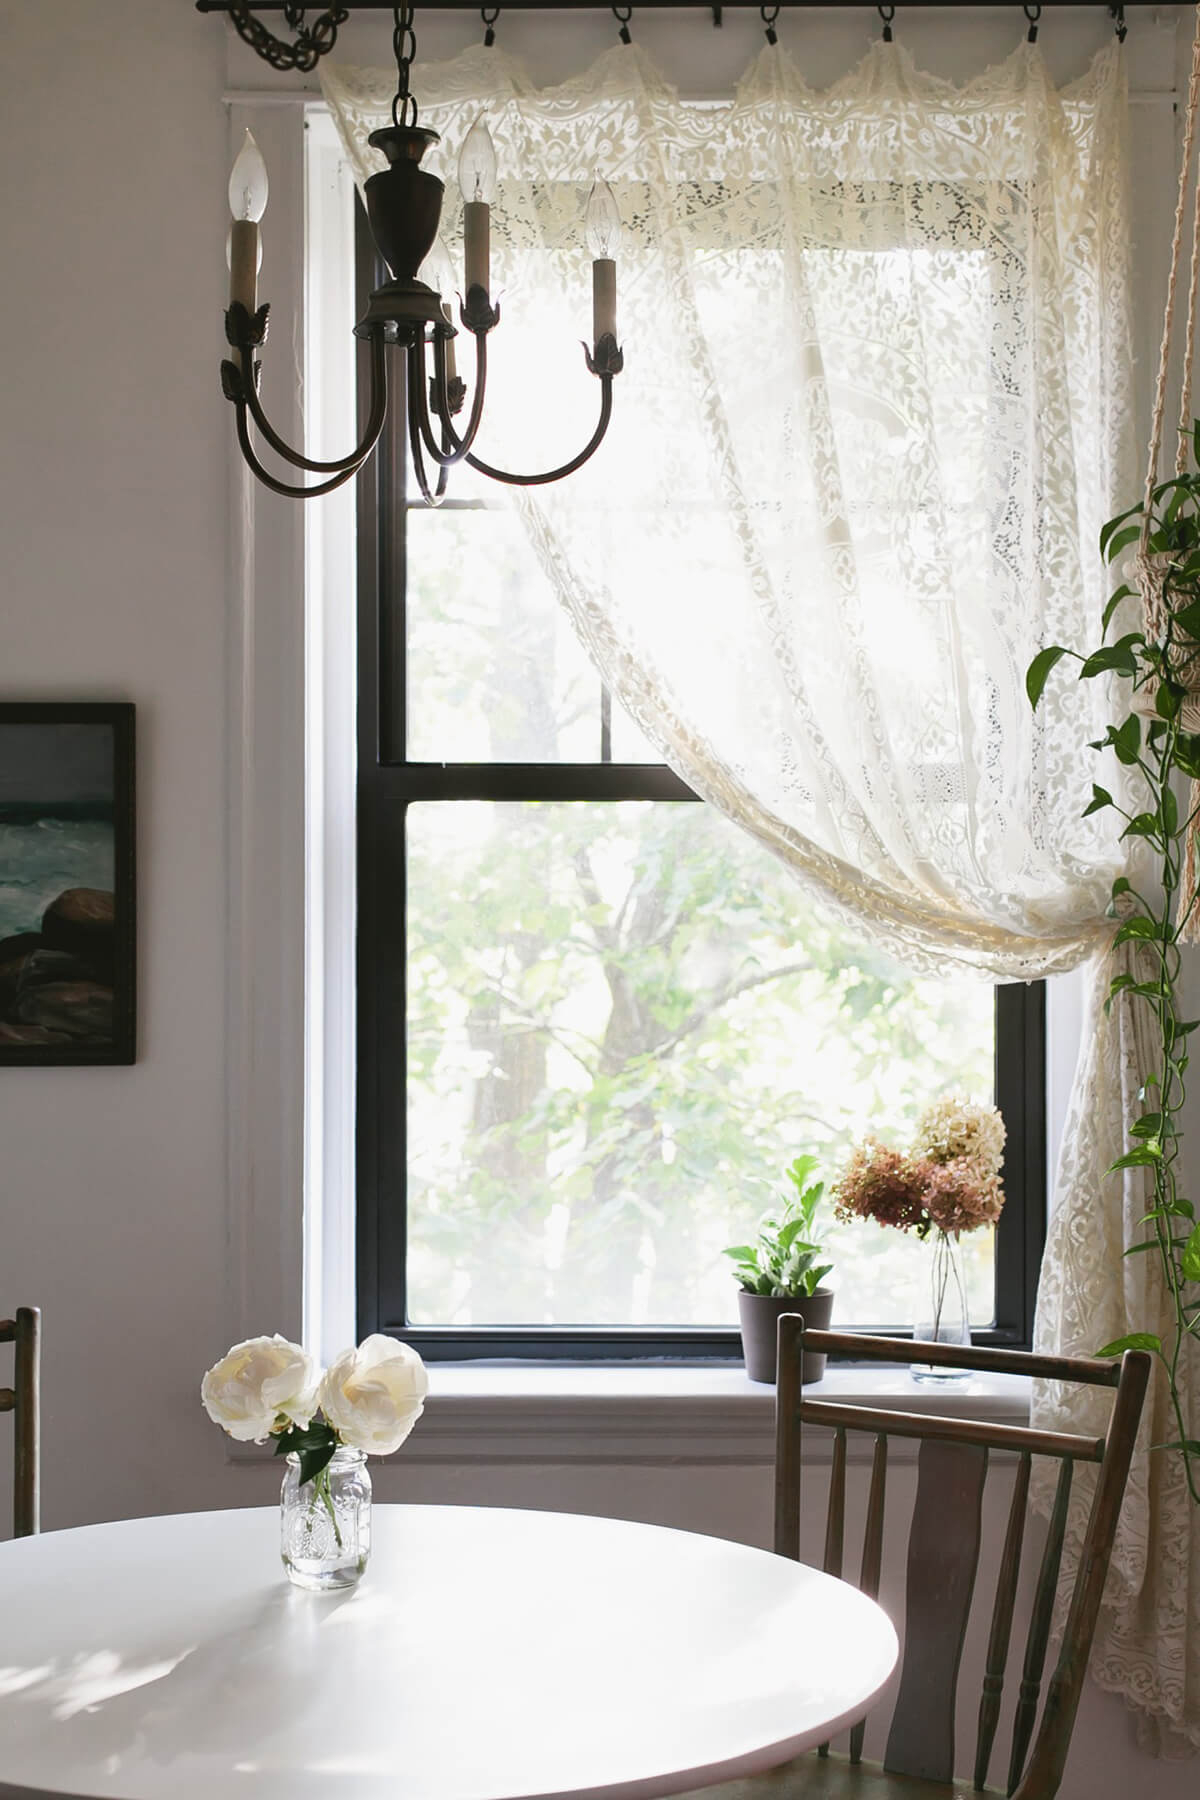 26 Best Farmhouse Window Treatment Ideas And Designs For 2019 